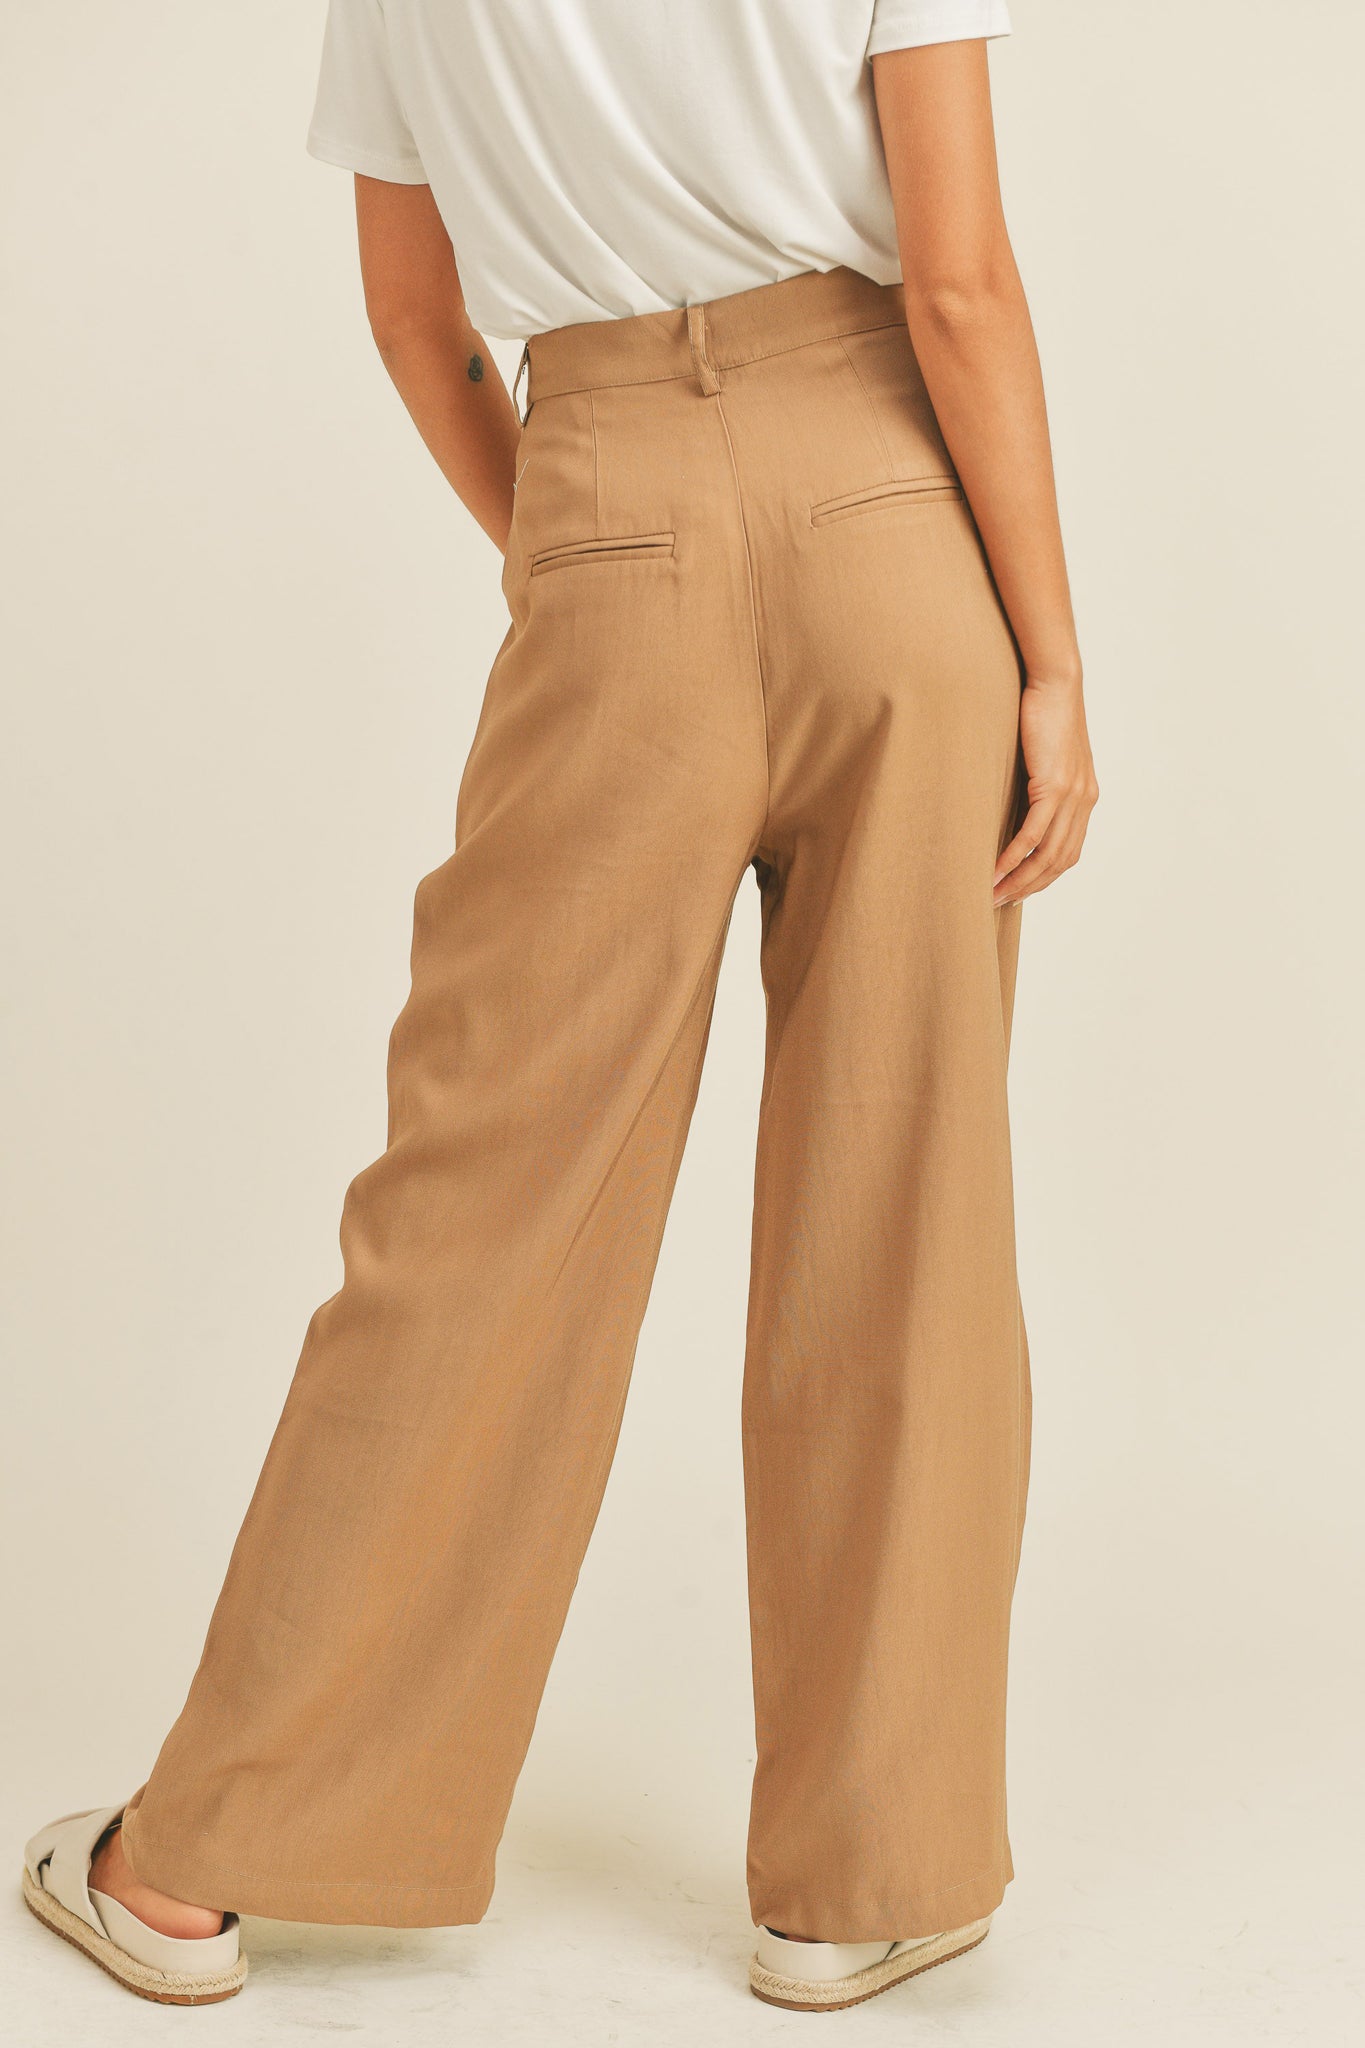 View 3 of Arid Trousers in Camel, a Pants from Larrea Cove. Detail: .